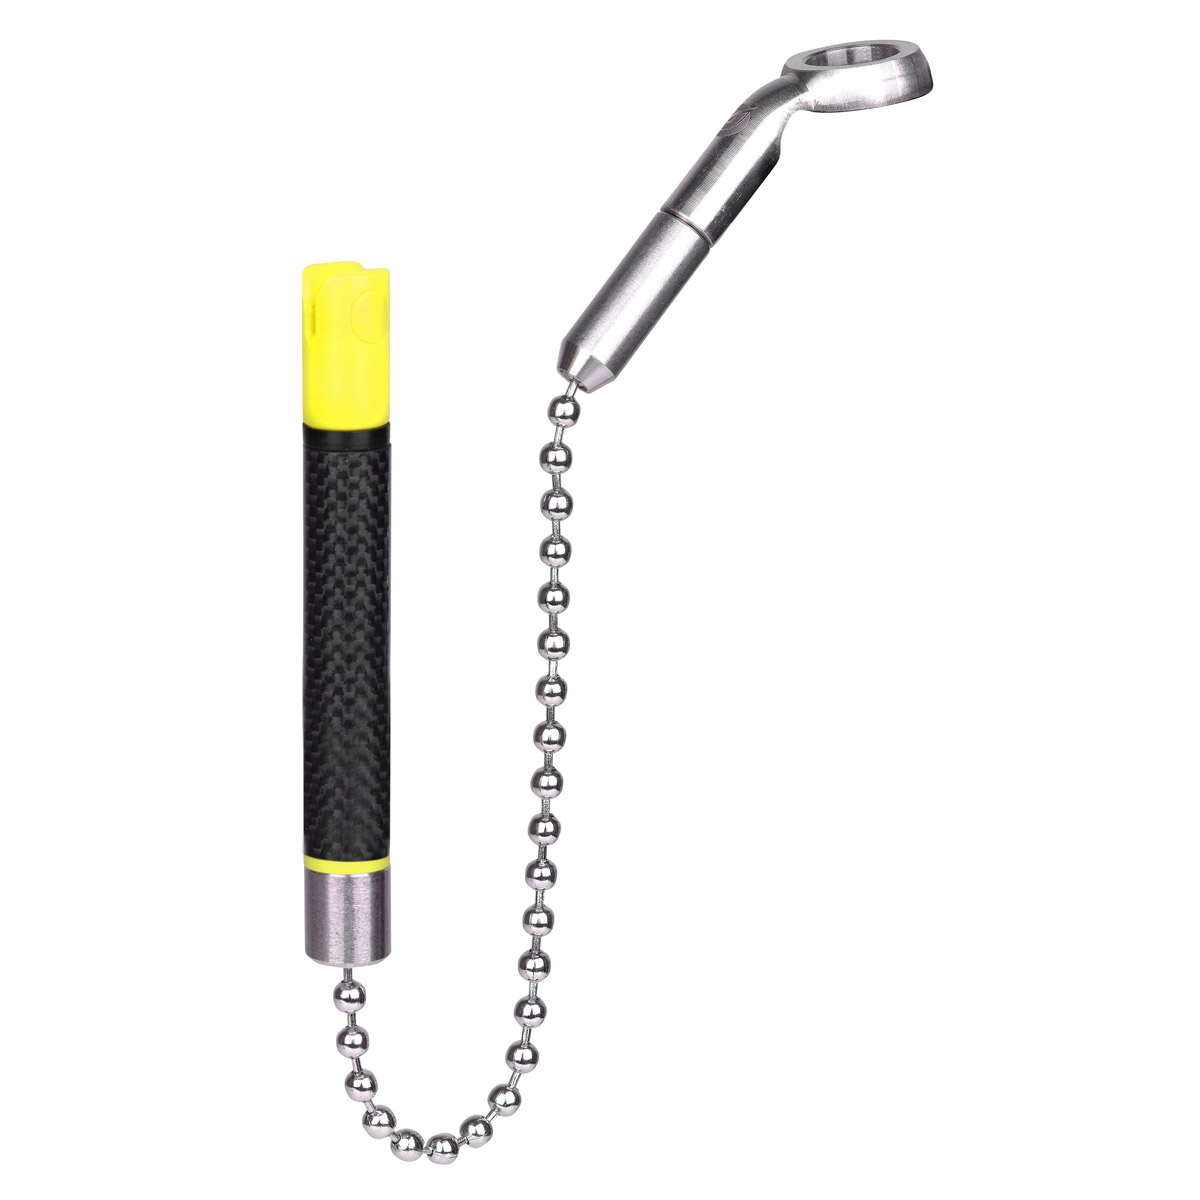 Pole Position Rizer Hanger Stainless Steel -  Yellow